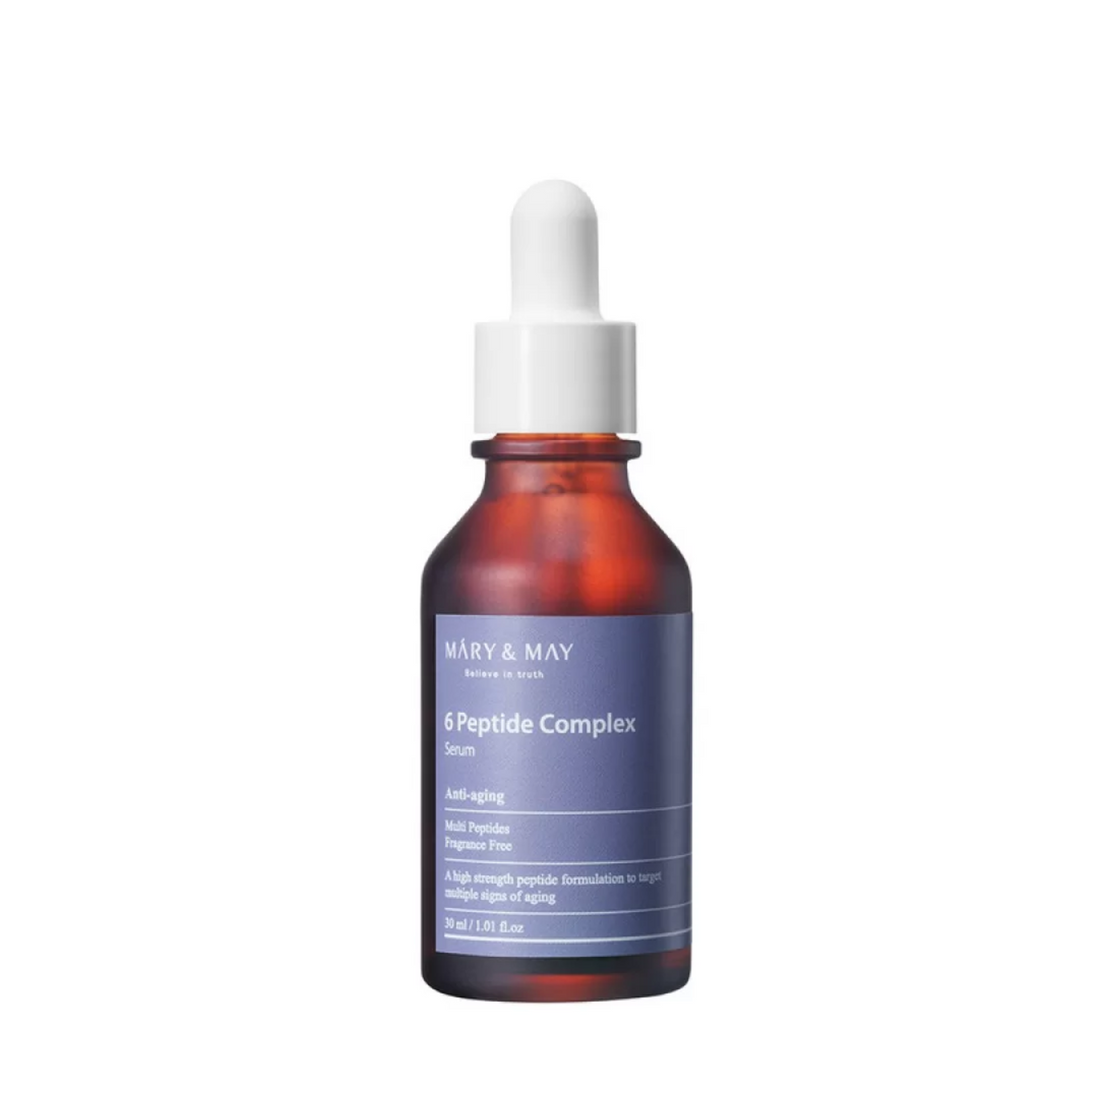 Mary &amp; May 6 Peptide complex Serum